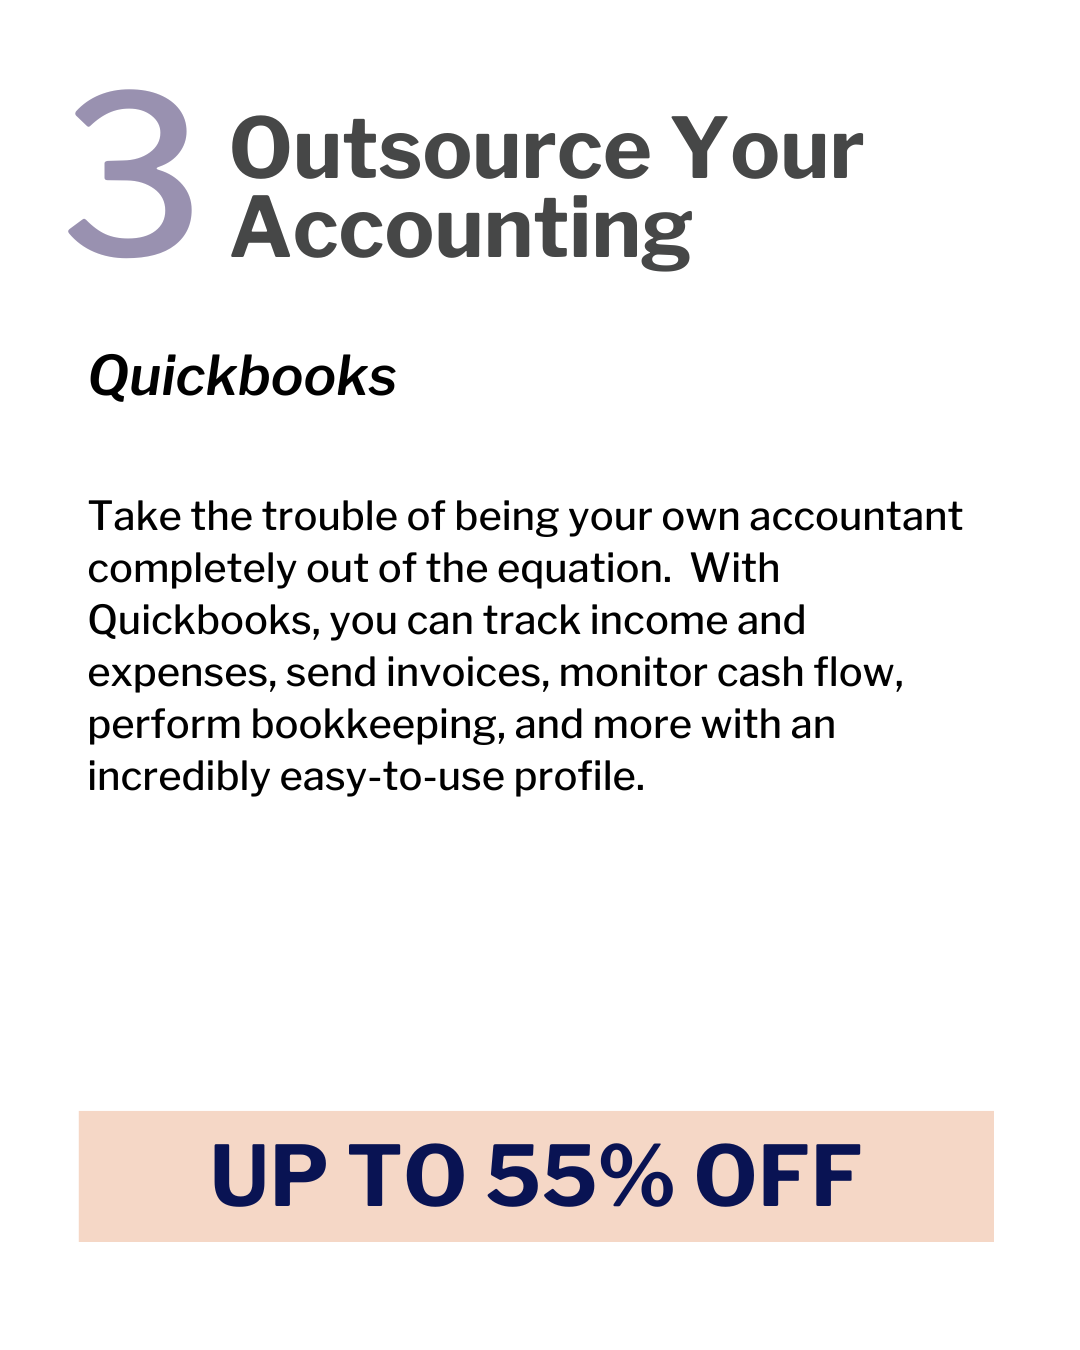 quickbooks-business-tools-her-first-100k.png